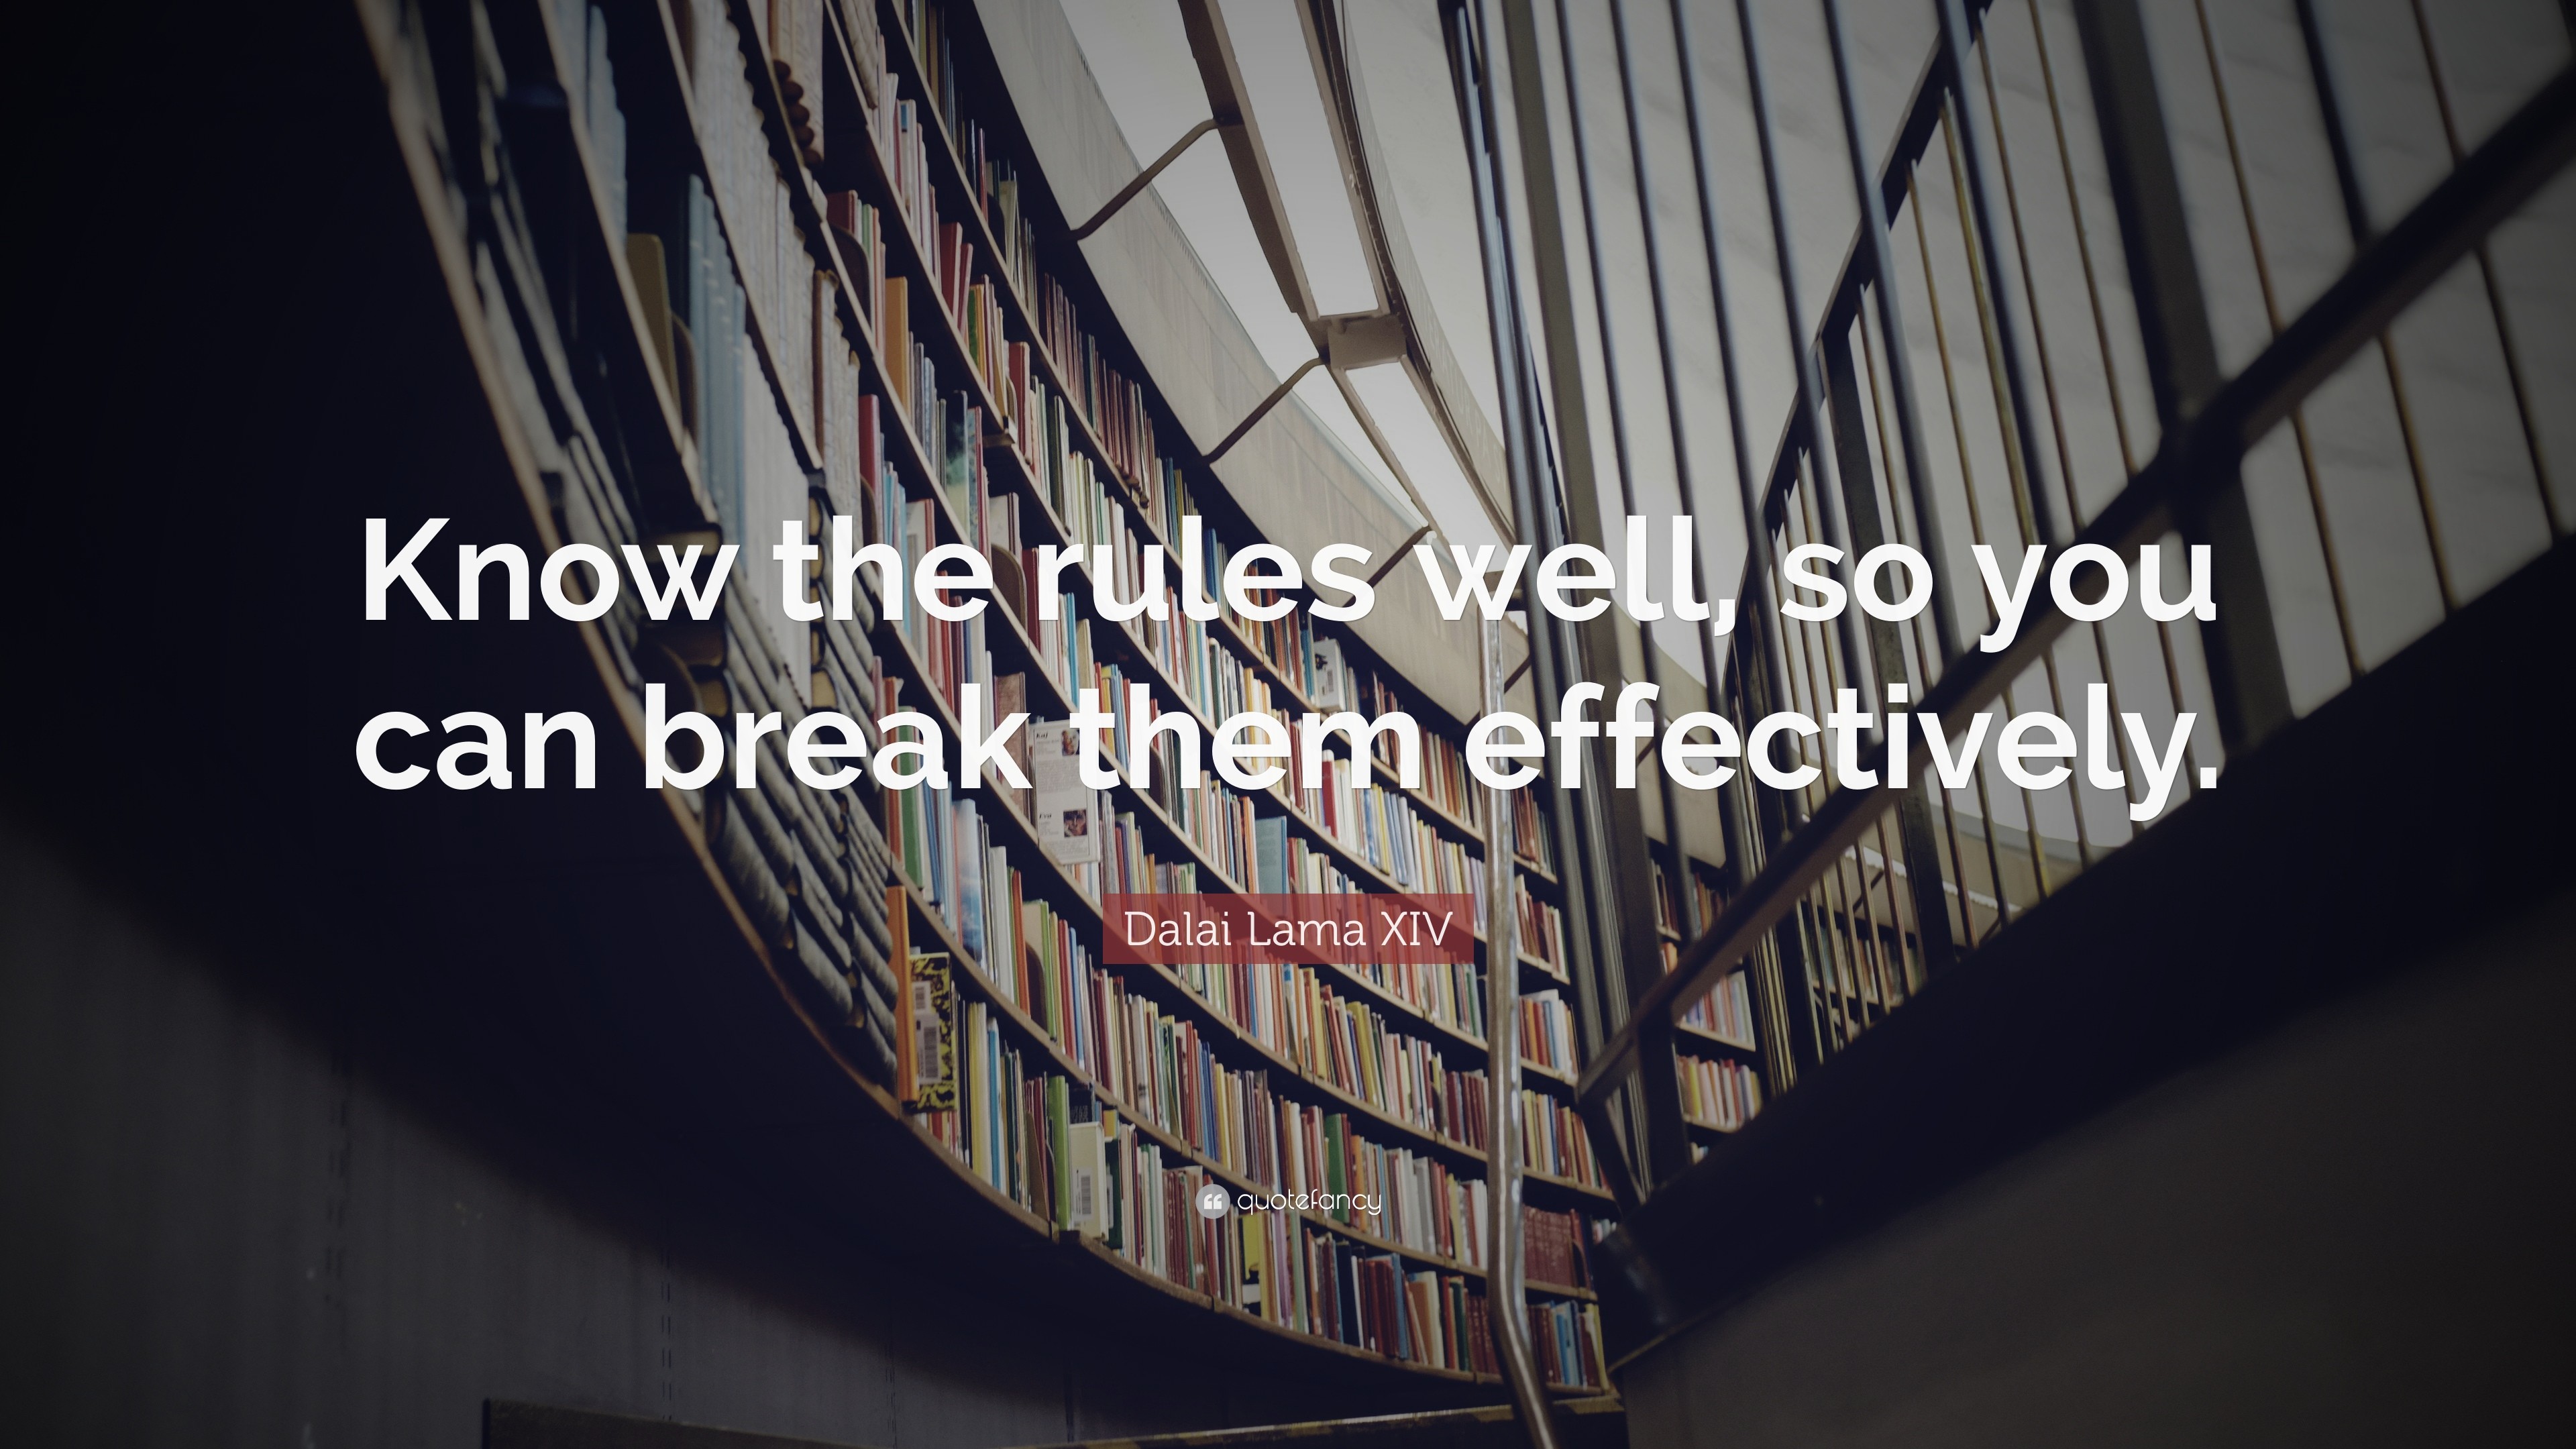 Quote Motivational Books Dalai Lama Buddhism Library Hallway Shelves Knowledge Typography Quotefancy 3840x2160